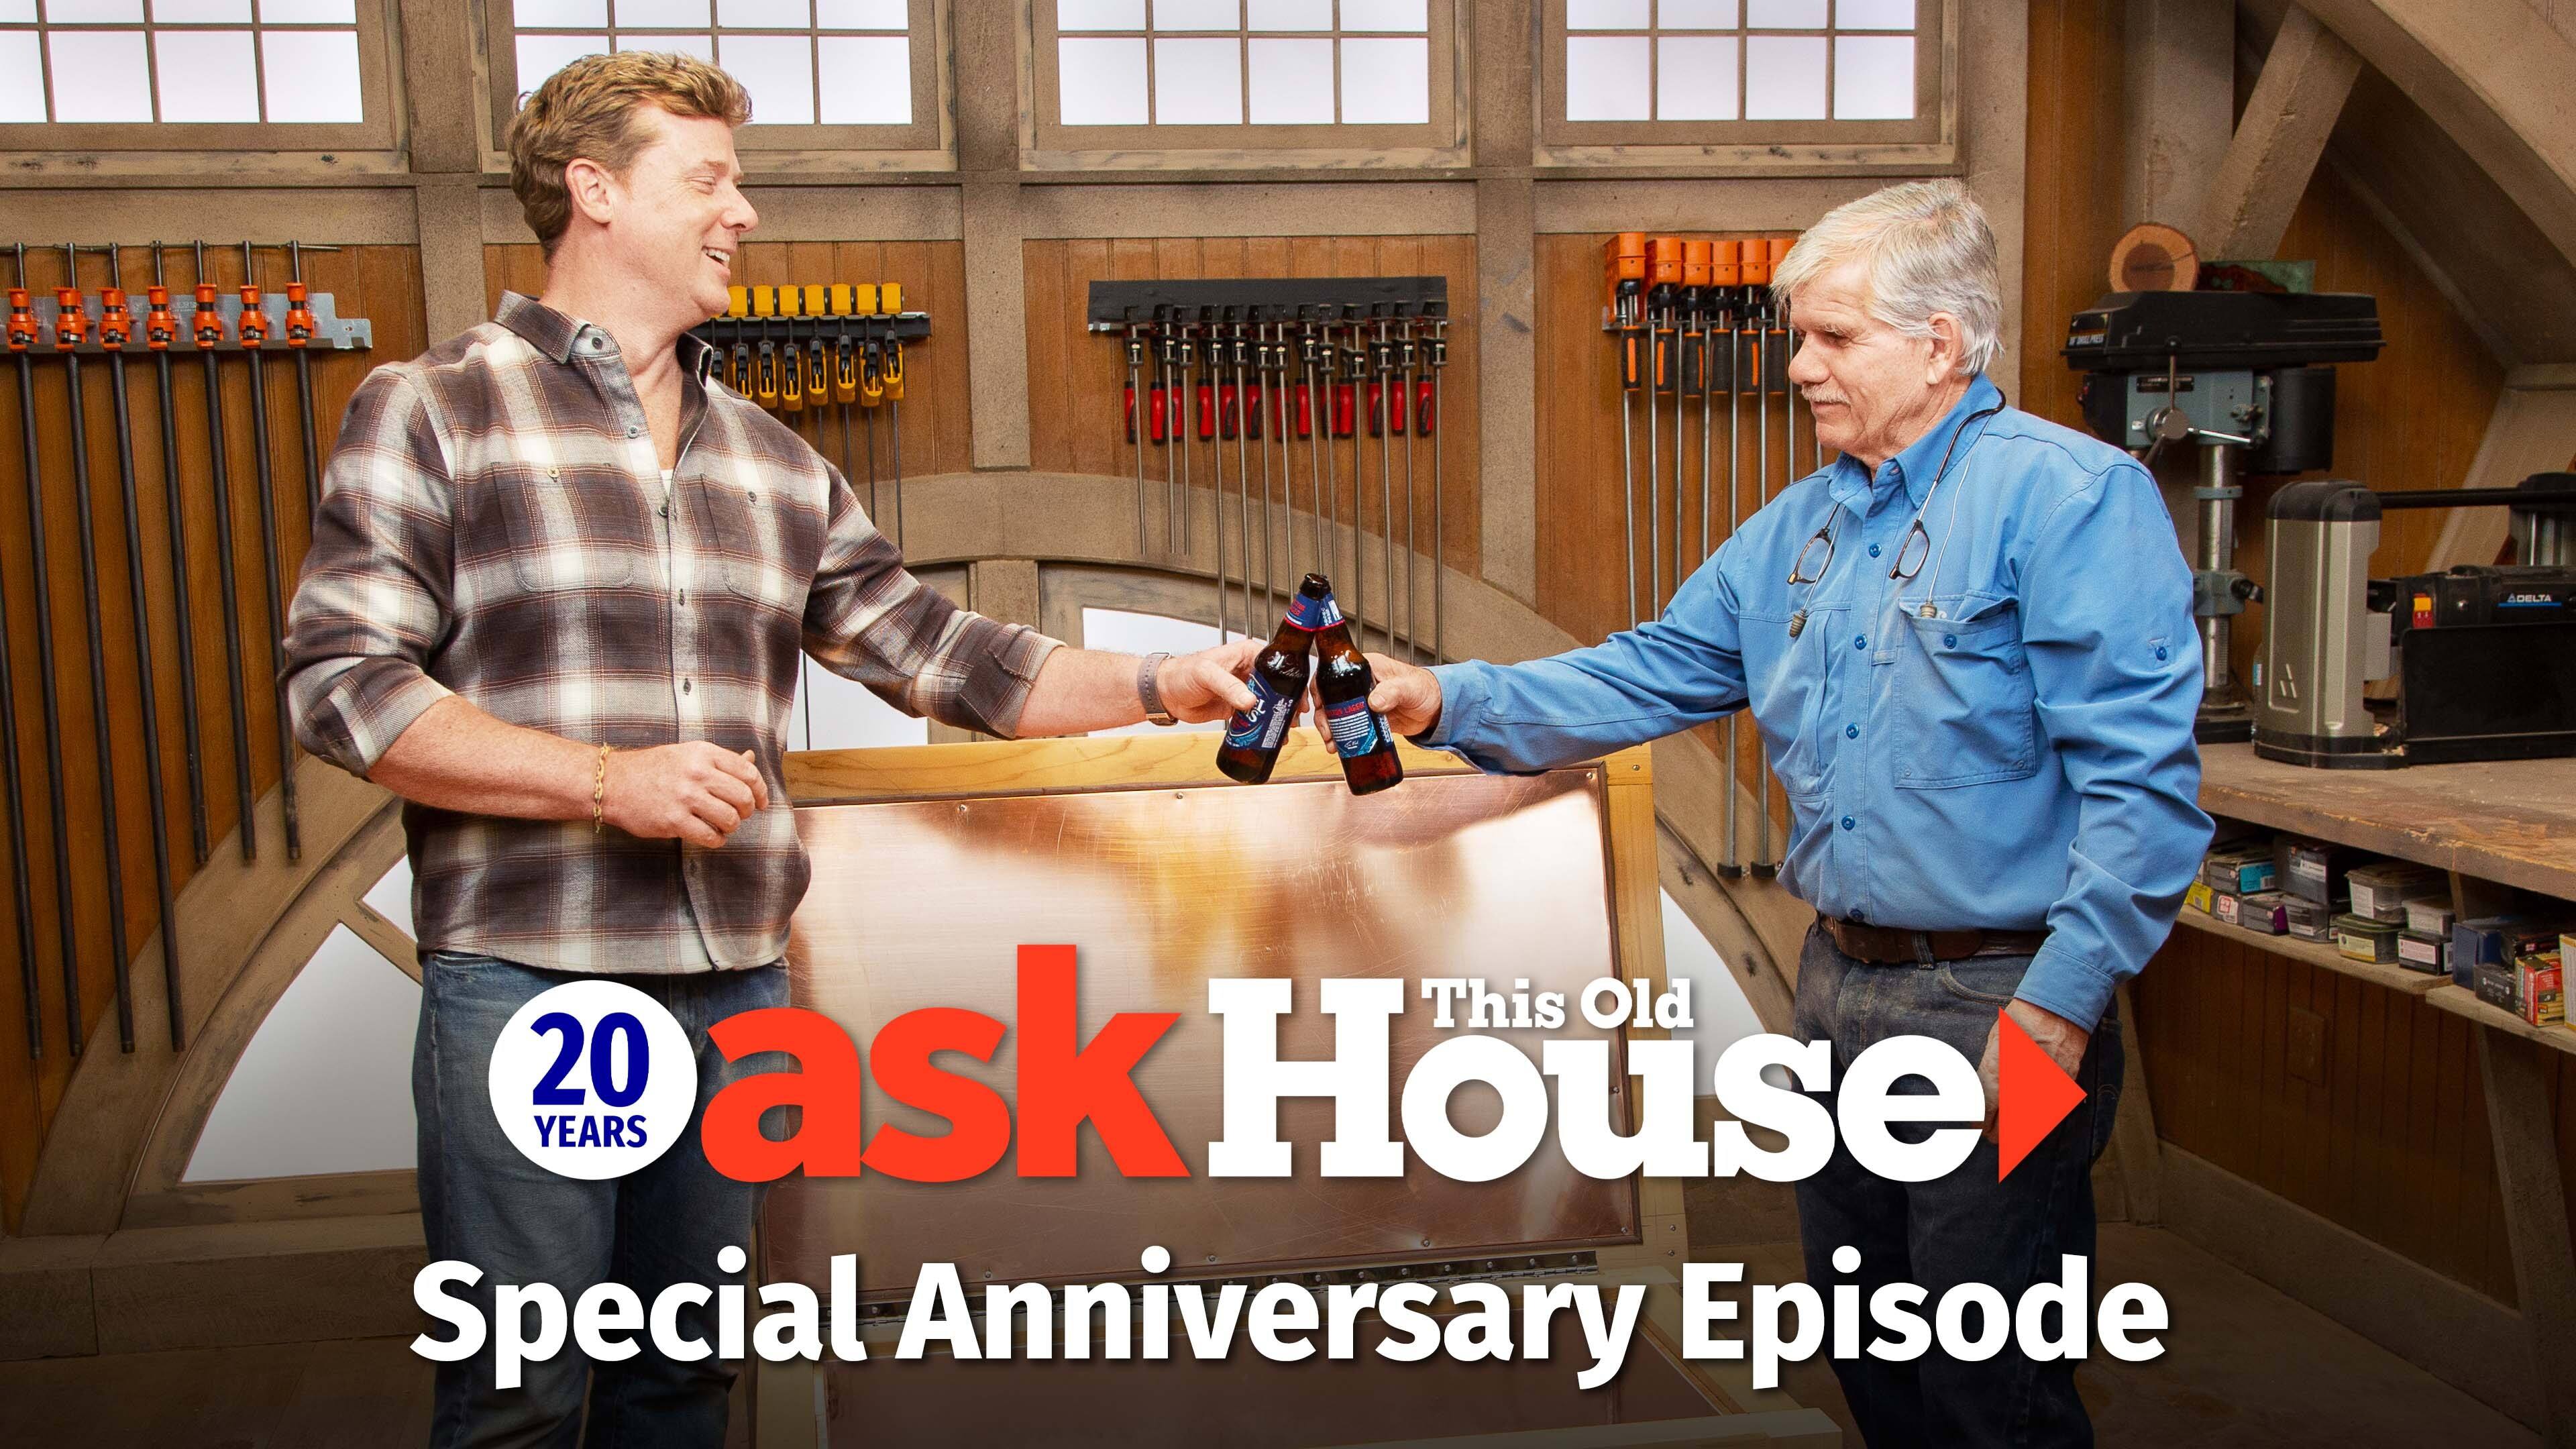 Roku to Air a Special 20th Anniversary Episode of ‘Ask This Old House’